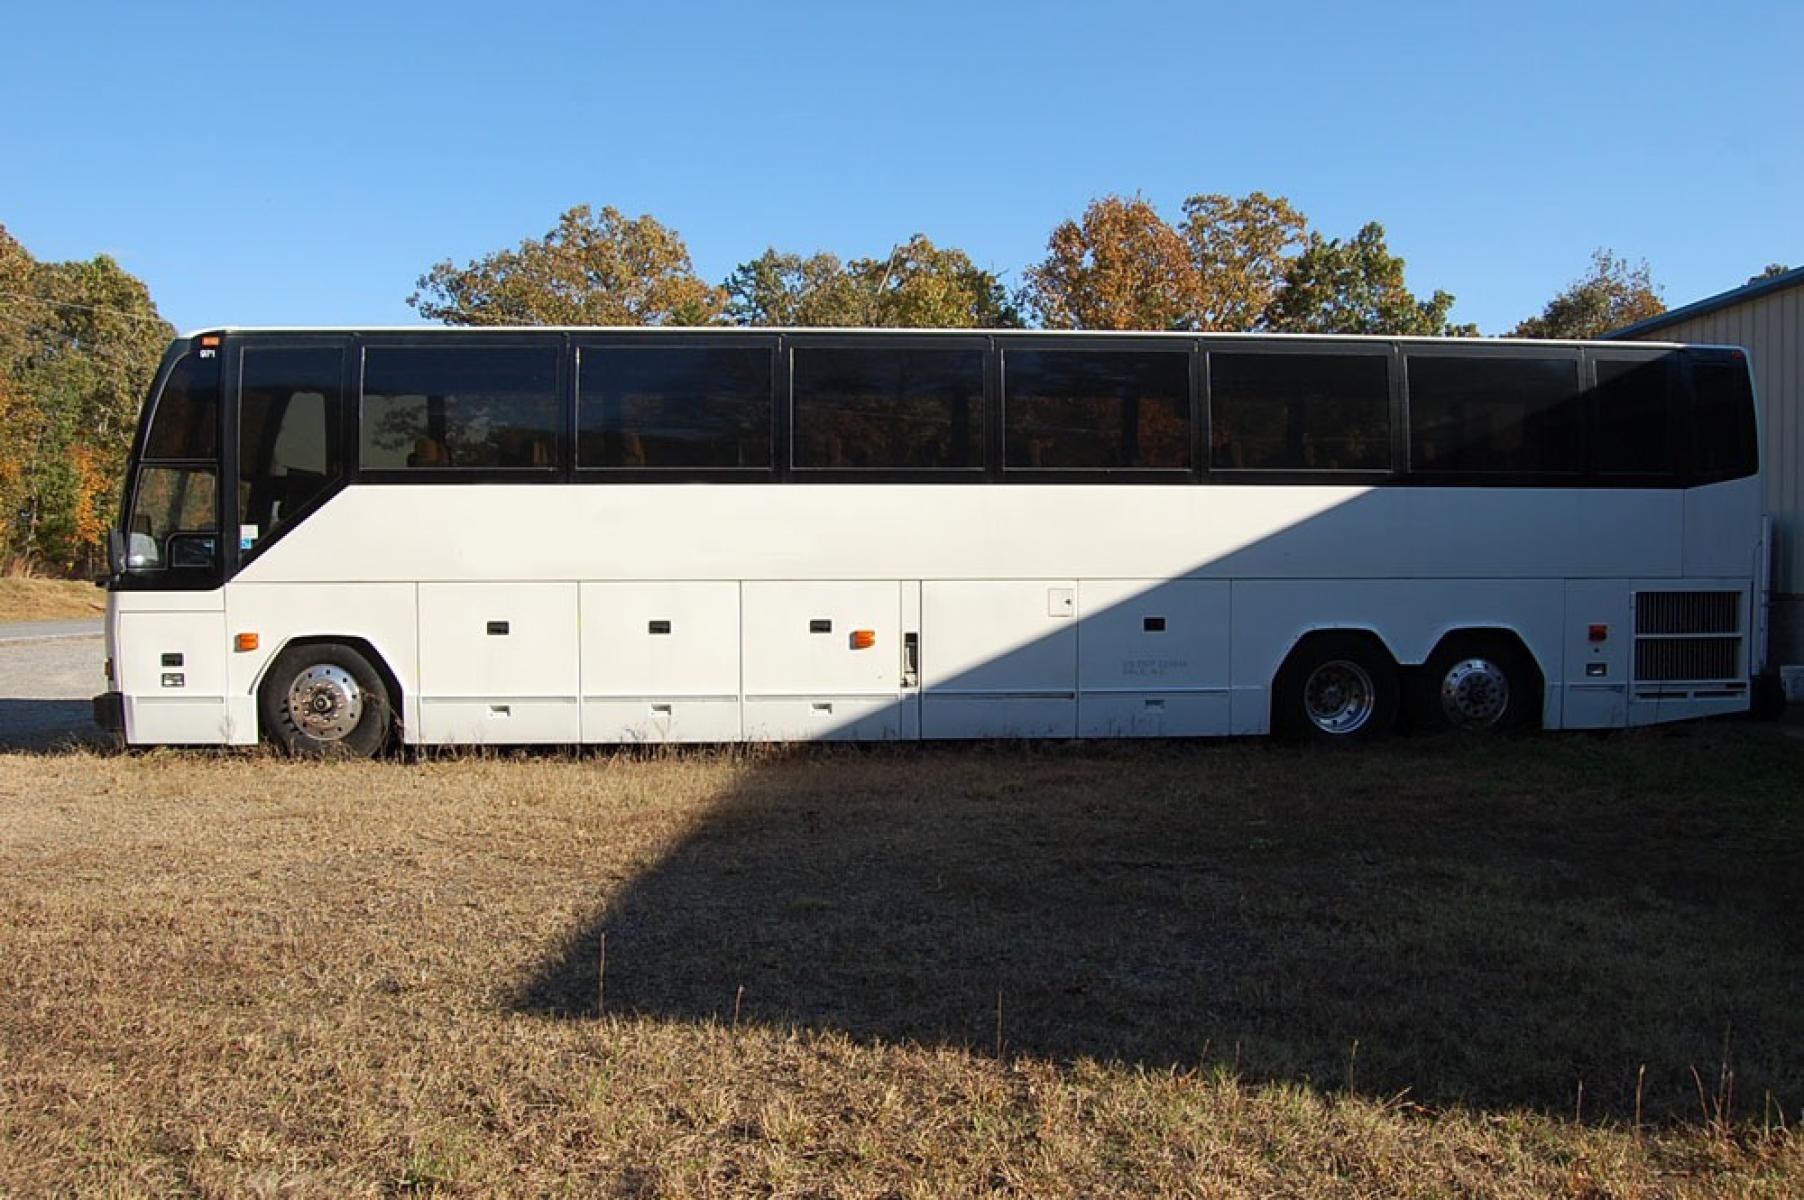 1997 Prevost HS-45 with an Detroit Diesel Series 60 engine, Allison transmission, 0.000000, 0.000000 - 1997 Prevost H3-45 - Series 60 Detroit Diesel - Allison Automatic Transmission - 45' - Alloy Wheels - 56 Passengers - Open Parcel Racks - 3 Monitors and DVD – Restroom - Photo #3